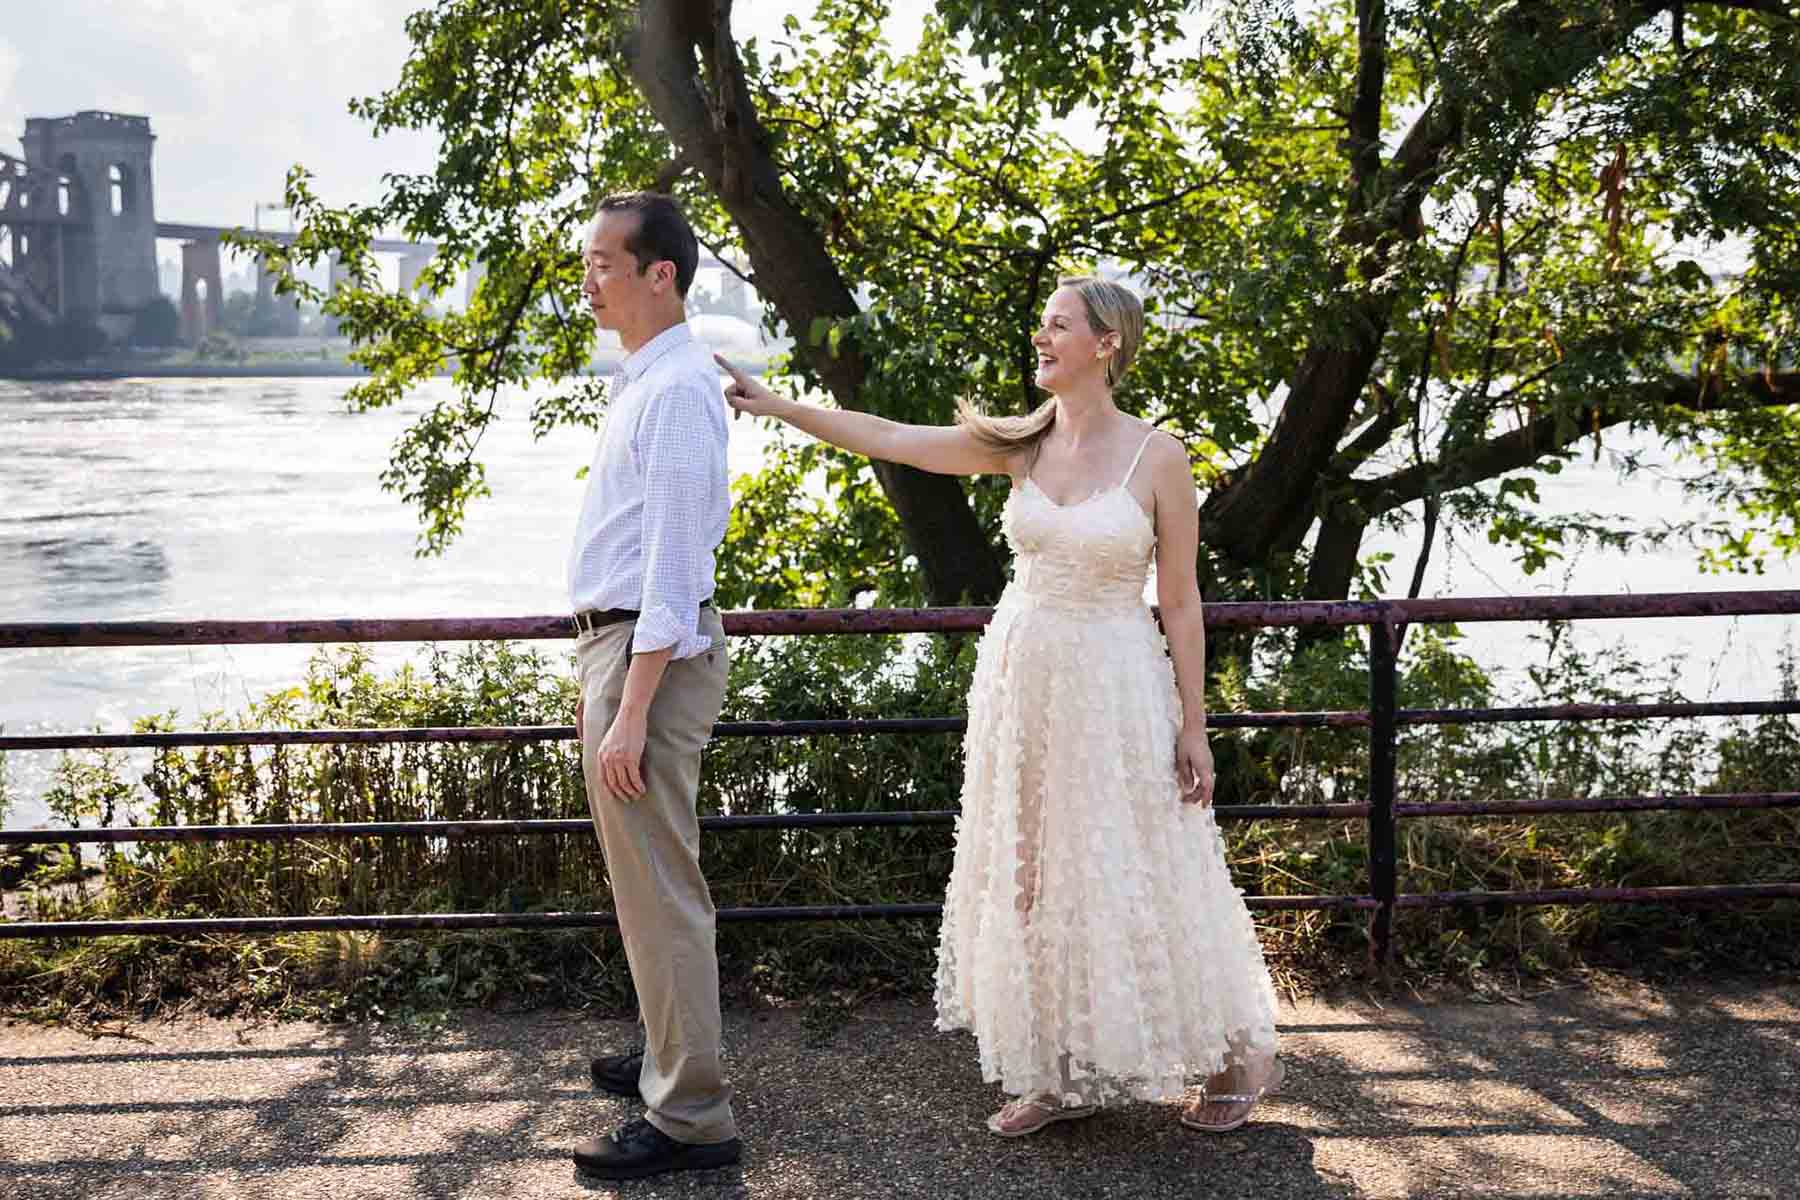 Astoria Park engagement photos of a couple reenacting their 'first look' along waterfront